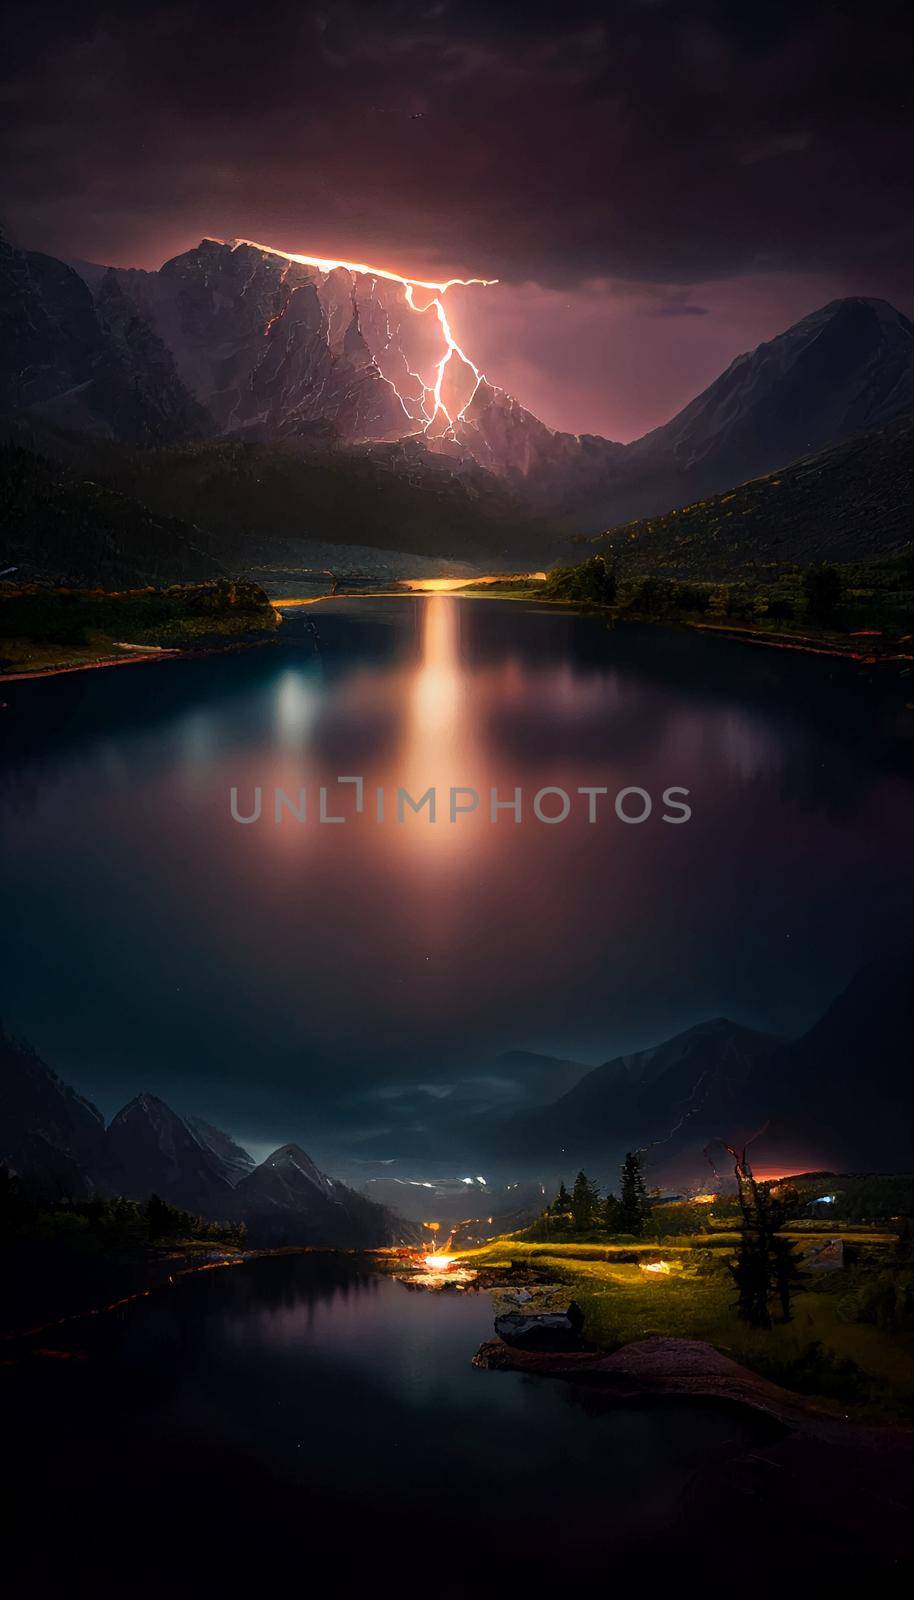 beautiful landscape with a lake surrounded with mountains illustration by JpRamos